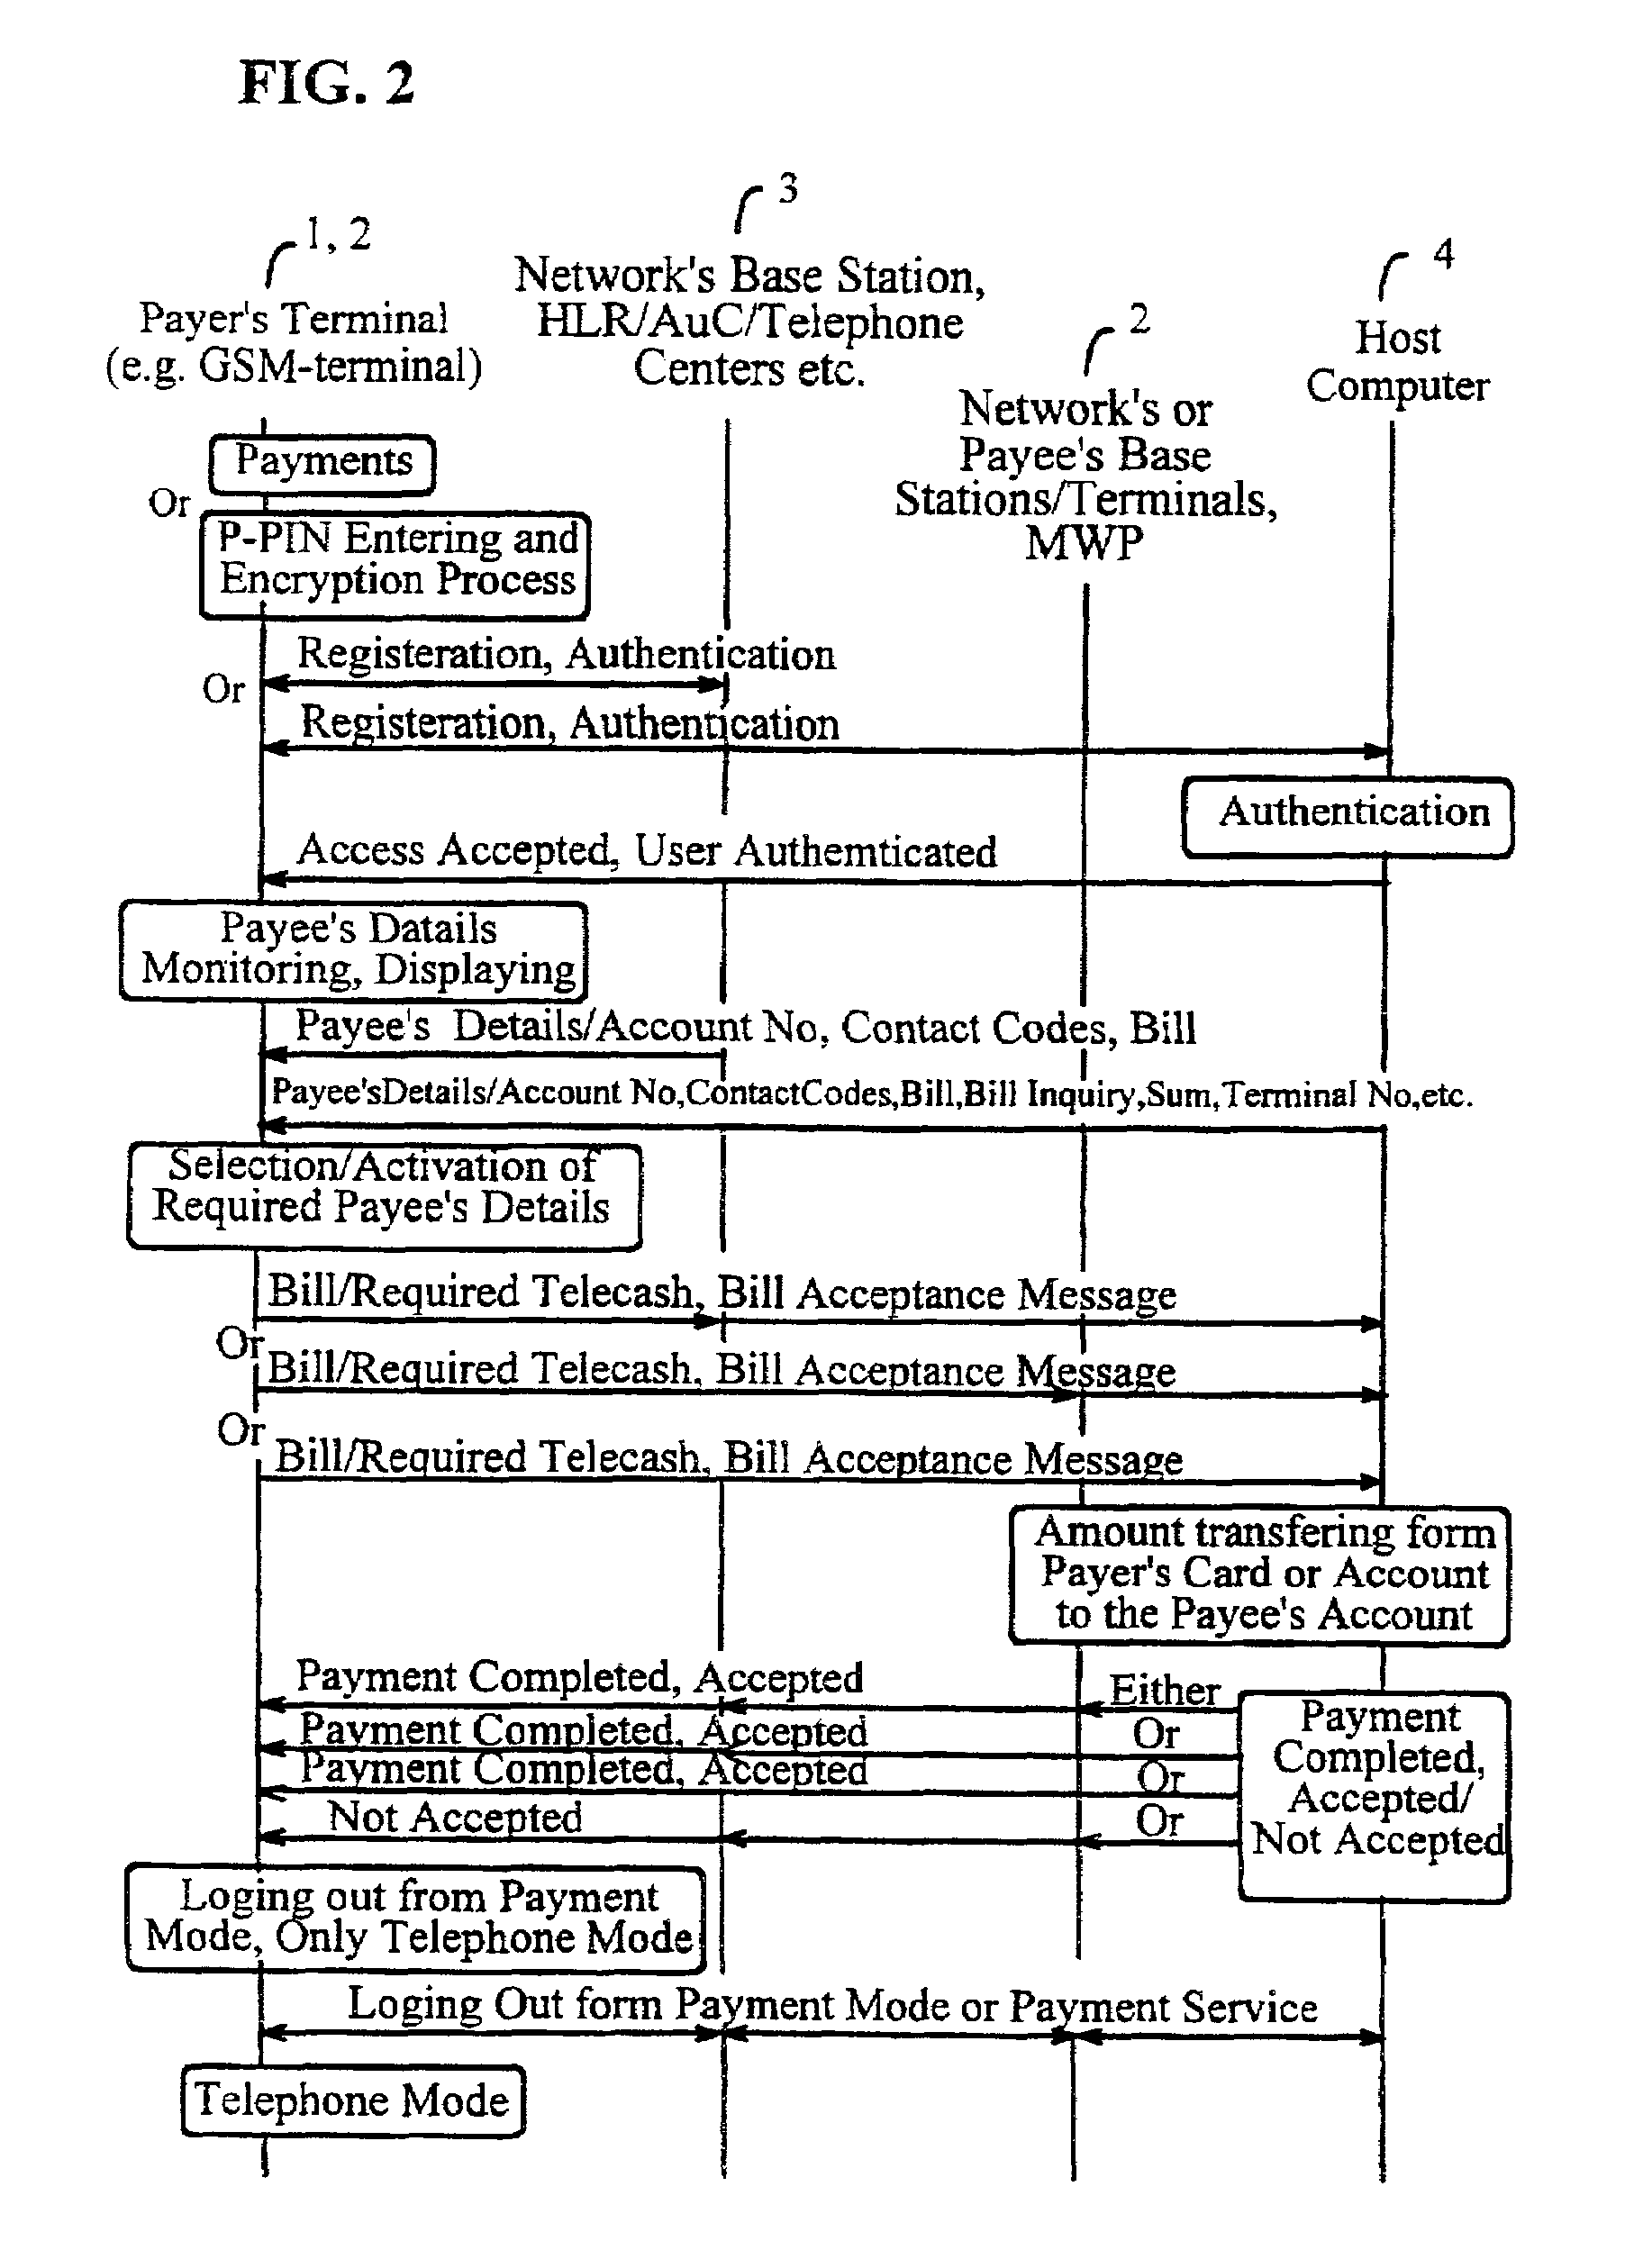 Authentication in a telecommunications network